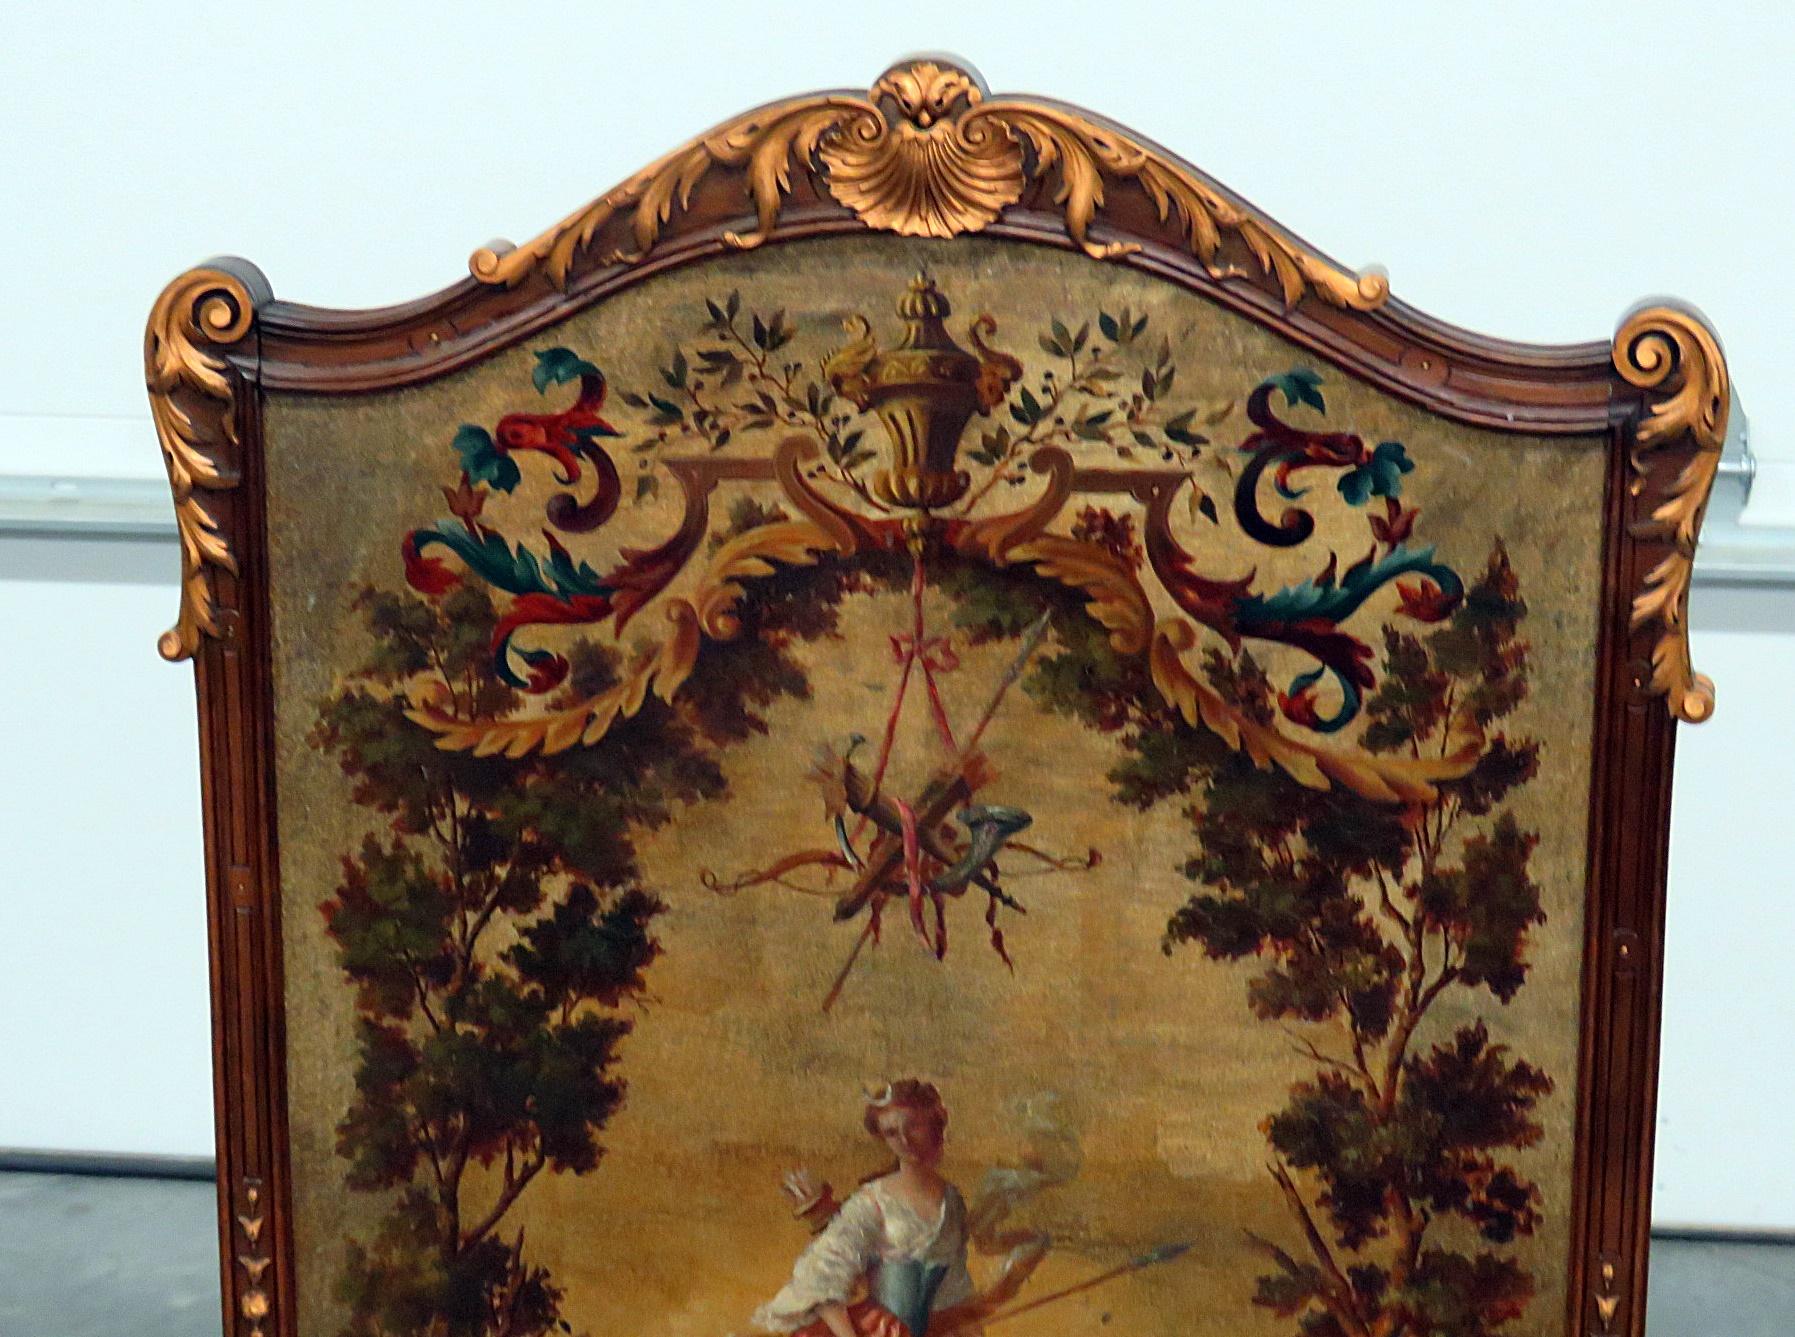 Regency style oil panted screen in a wooden frame with gilt accents.